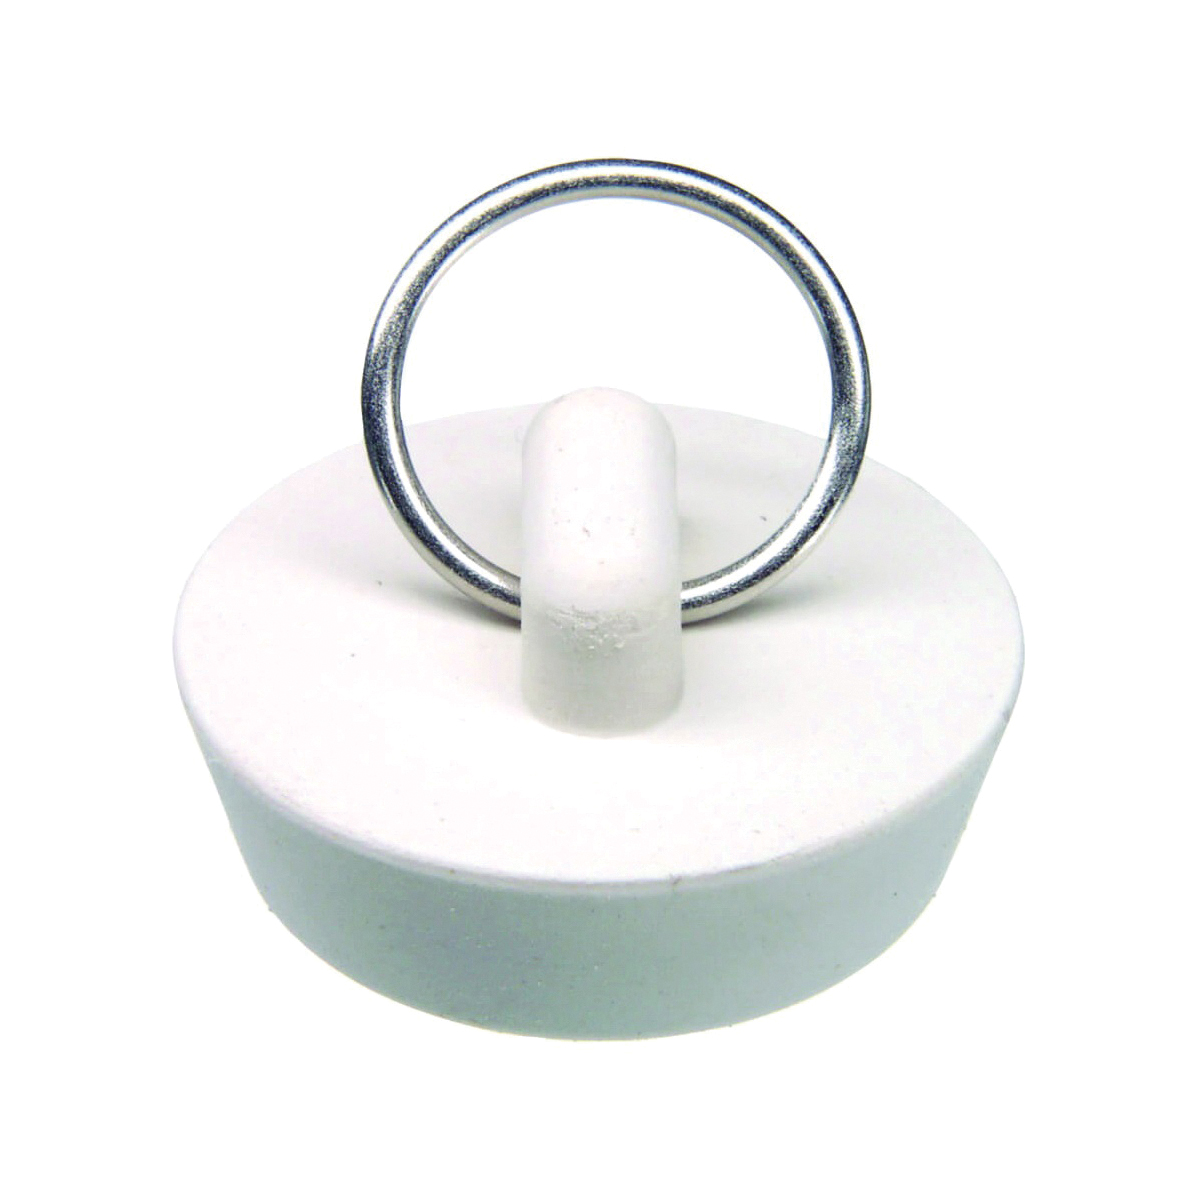 80225 Drain Stopper, Rubber, White, For: 1-1/4 in Drain Systems, Universal Sink